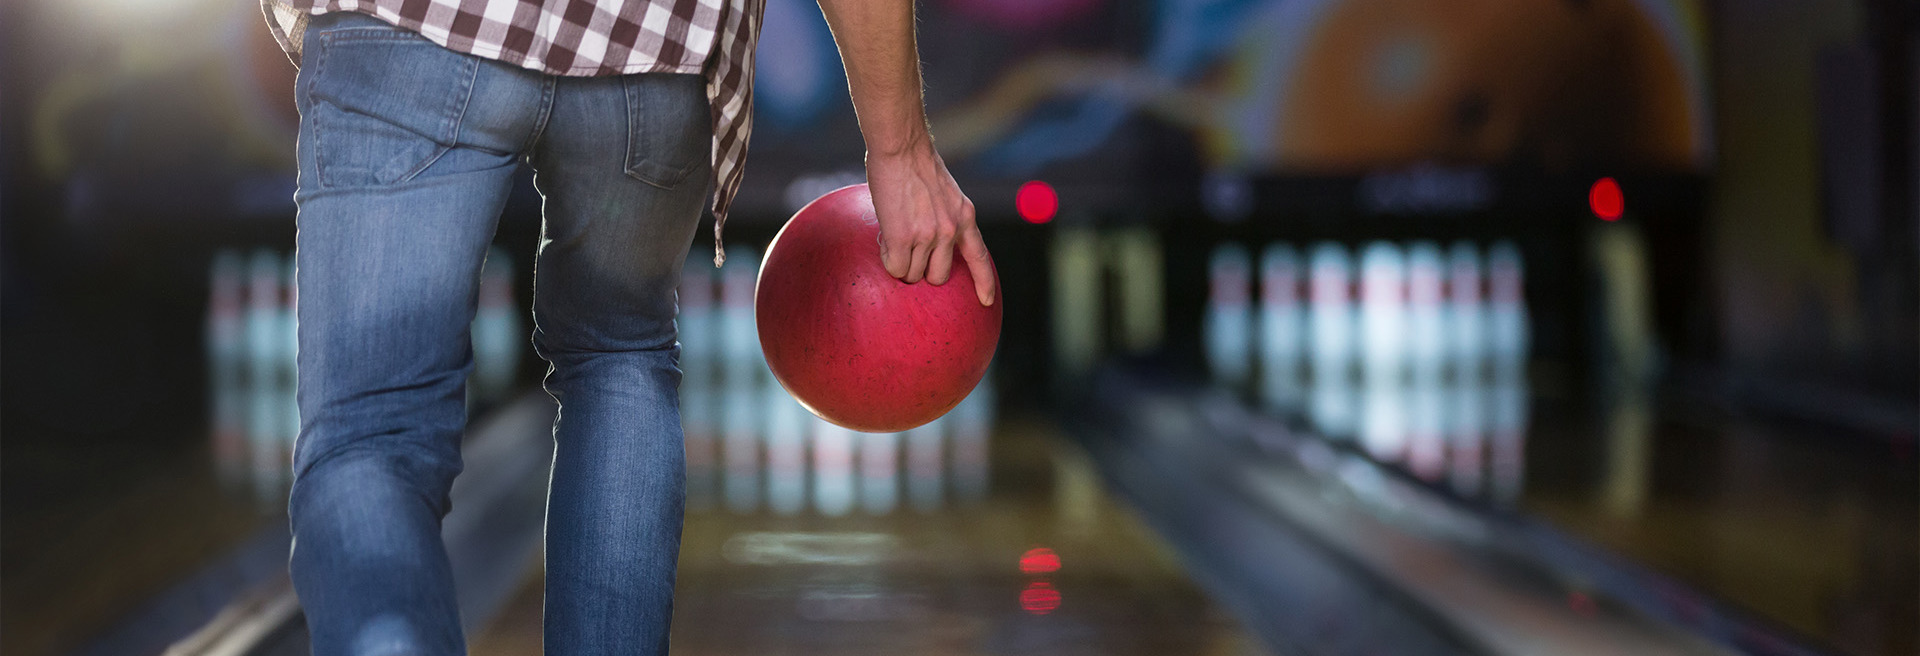 Male proceeding to throw a red bowling ball down a polished lane